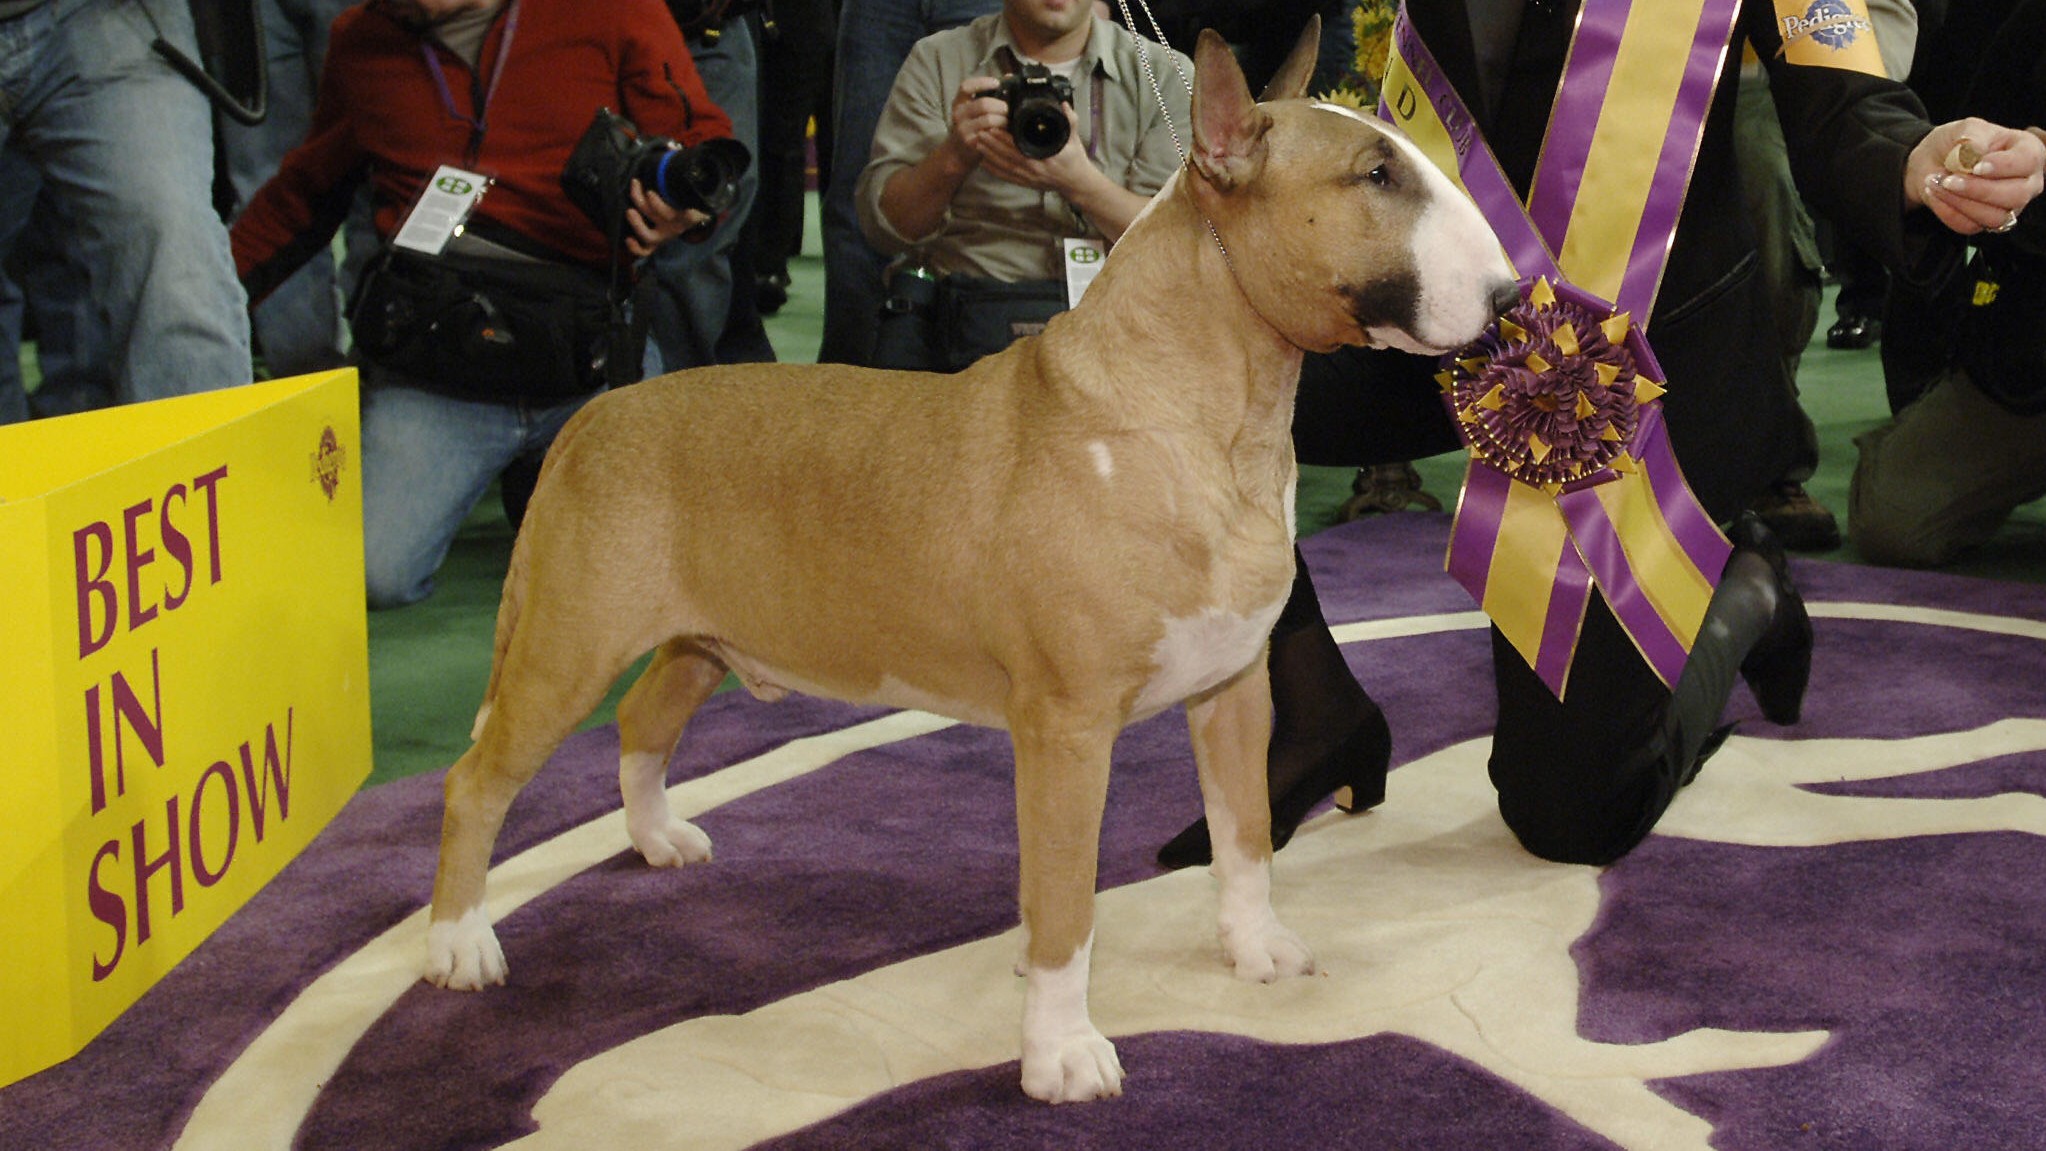 Westminster Dog Show schedule 2021 Dates, times, TV channels, live